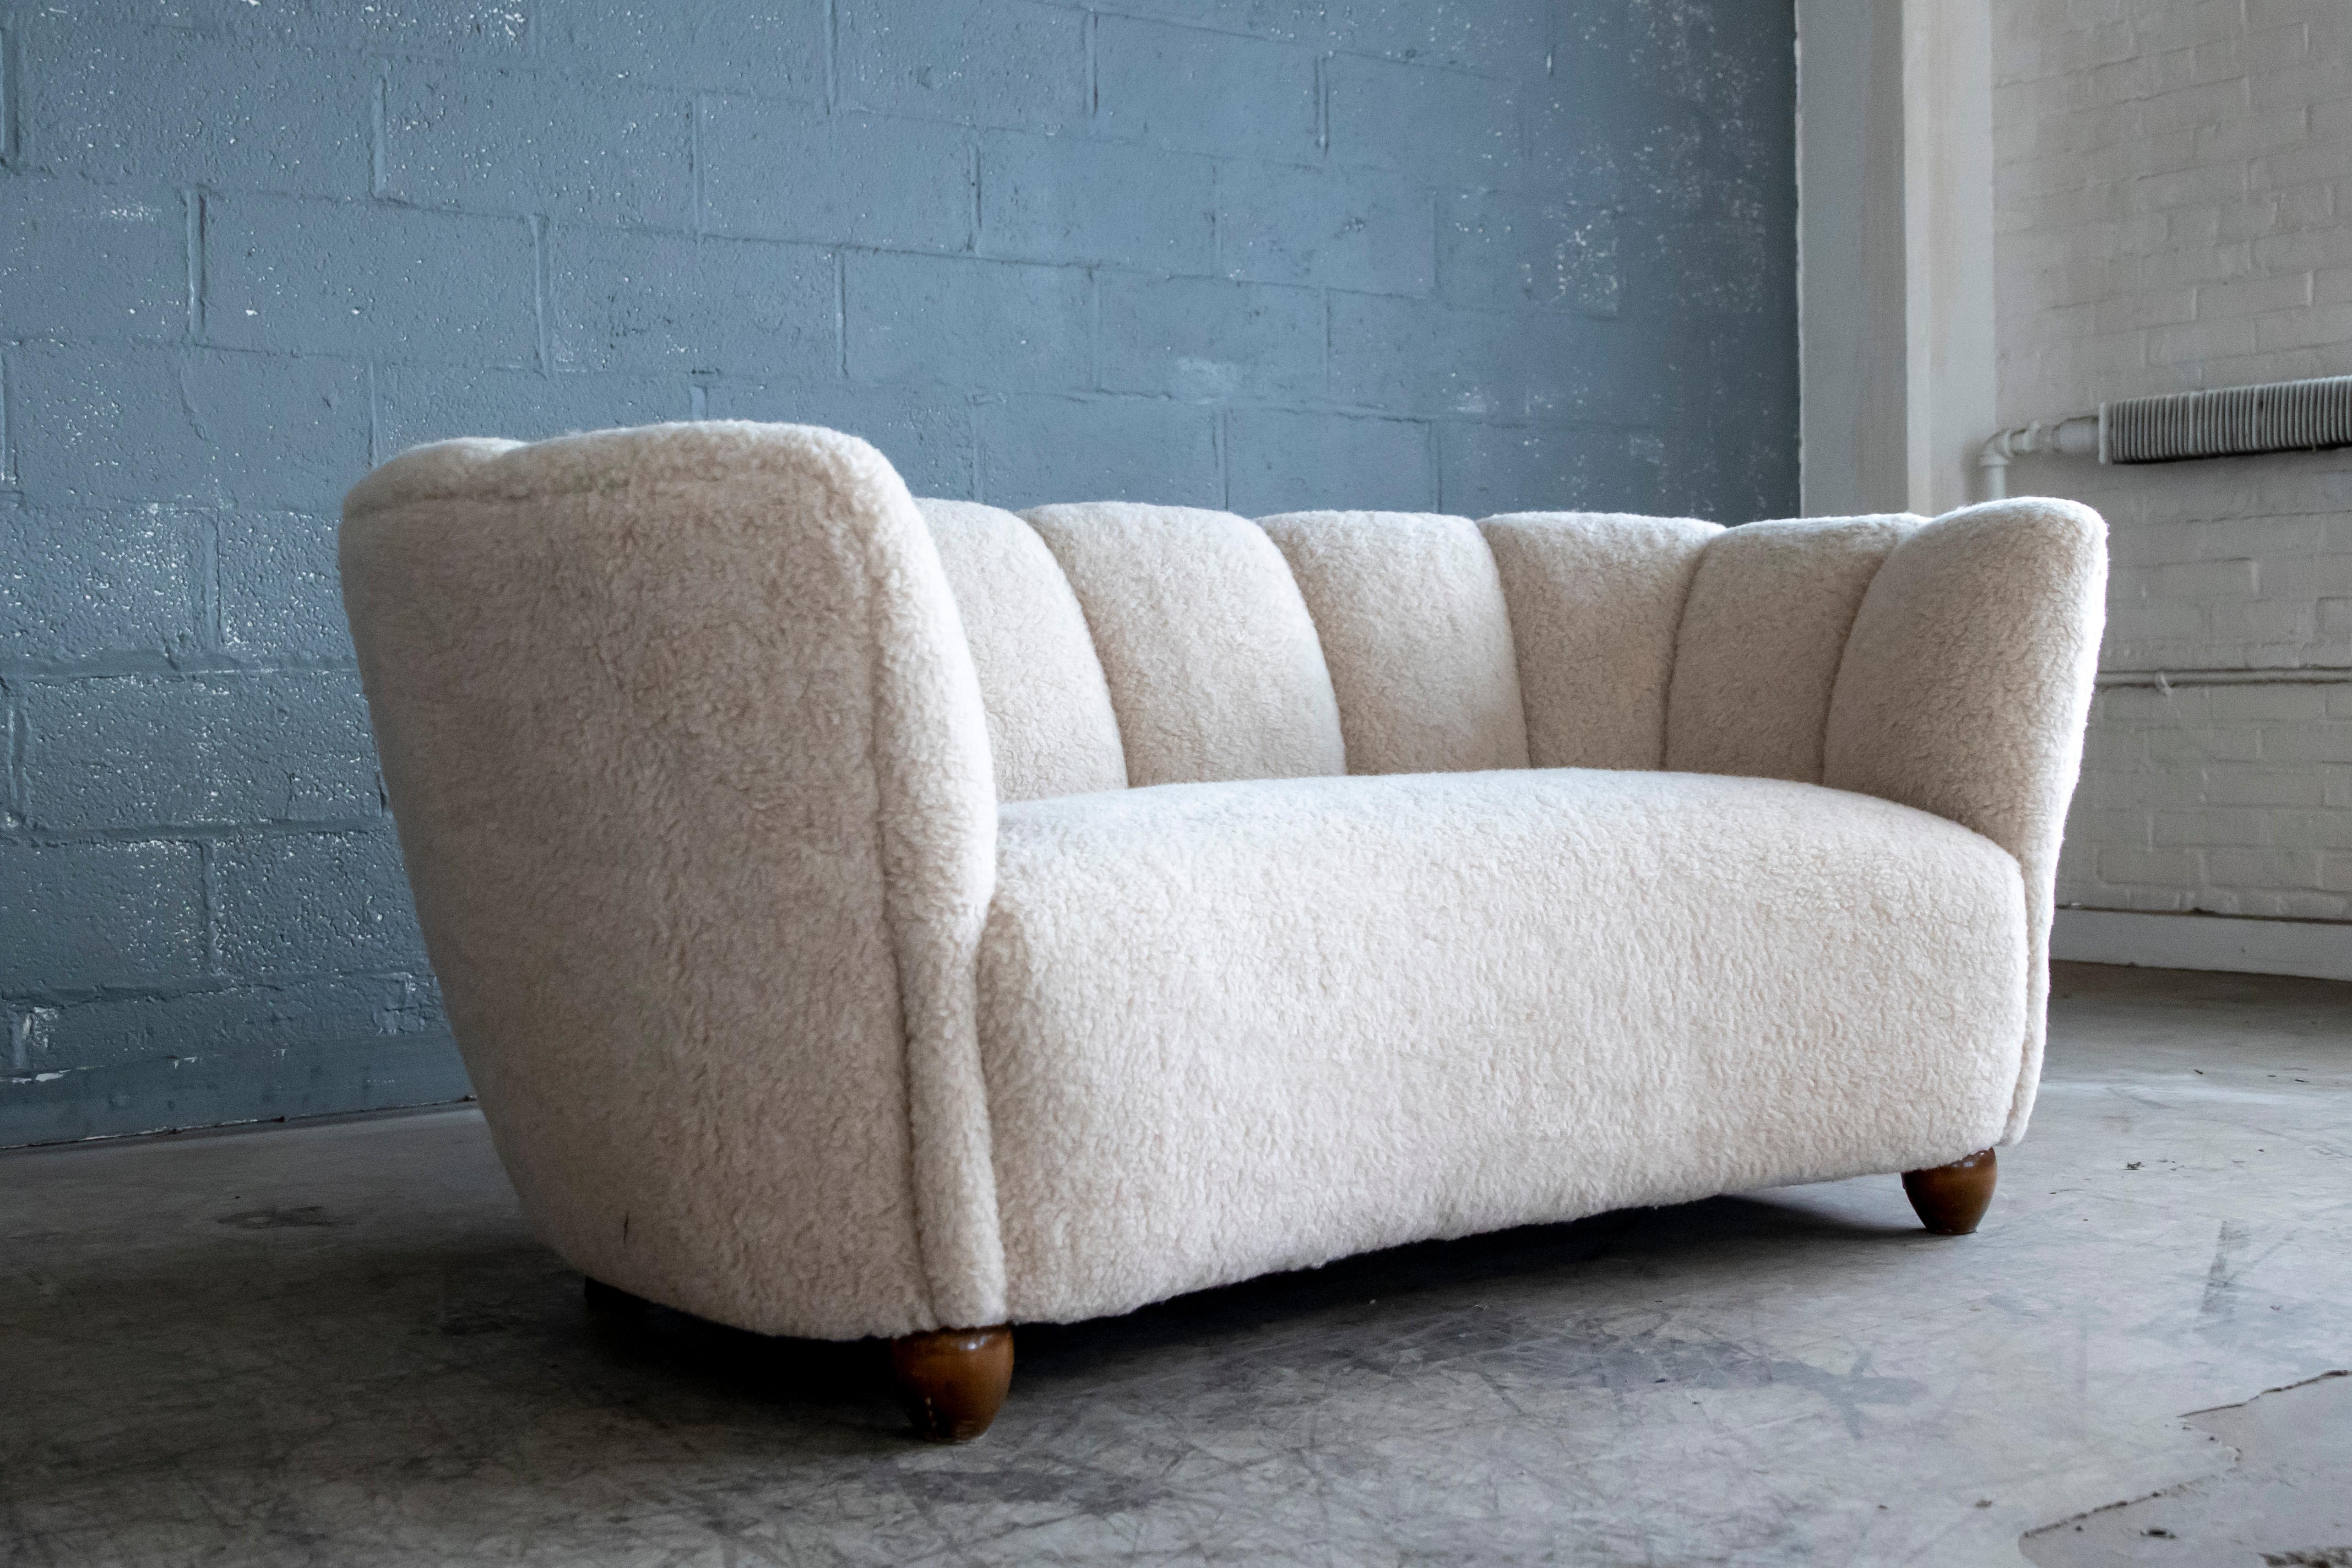 Danish 1940's Banana Shaped Curved Loveseat or Sofa Covered in Beige Lambswool 1